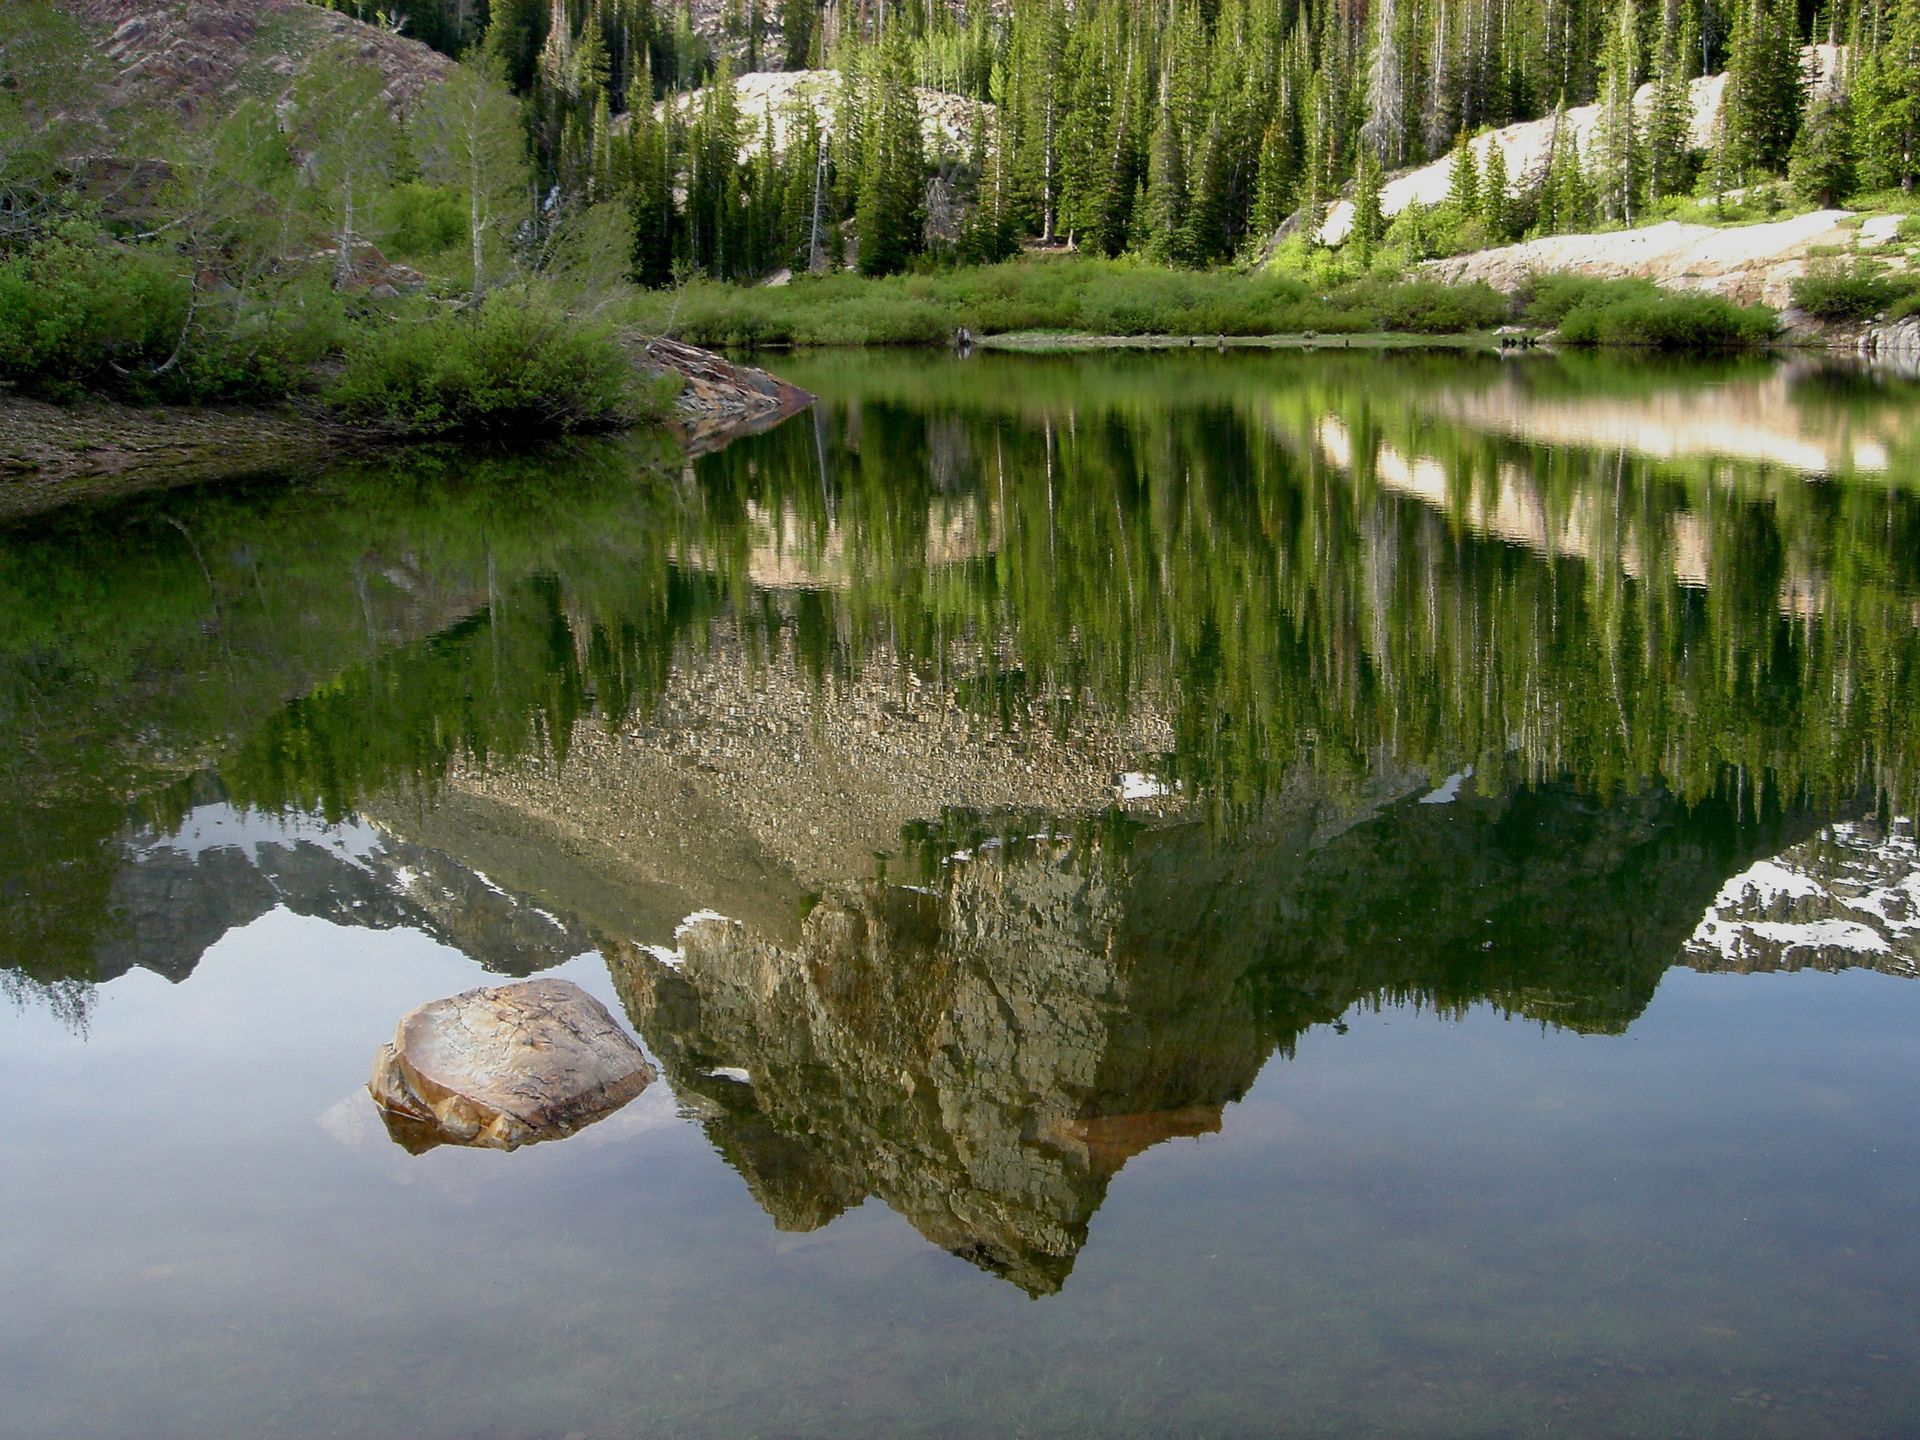 The Rocky Mountains reflected in a lake.